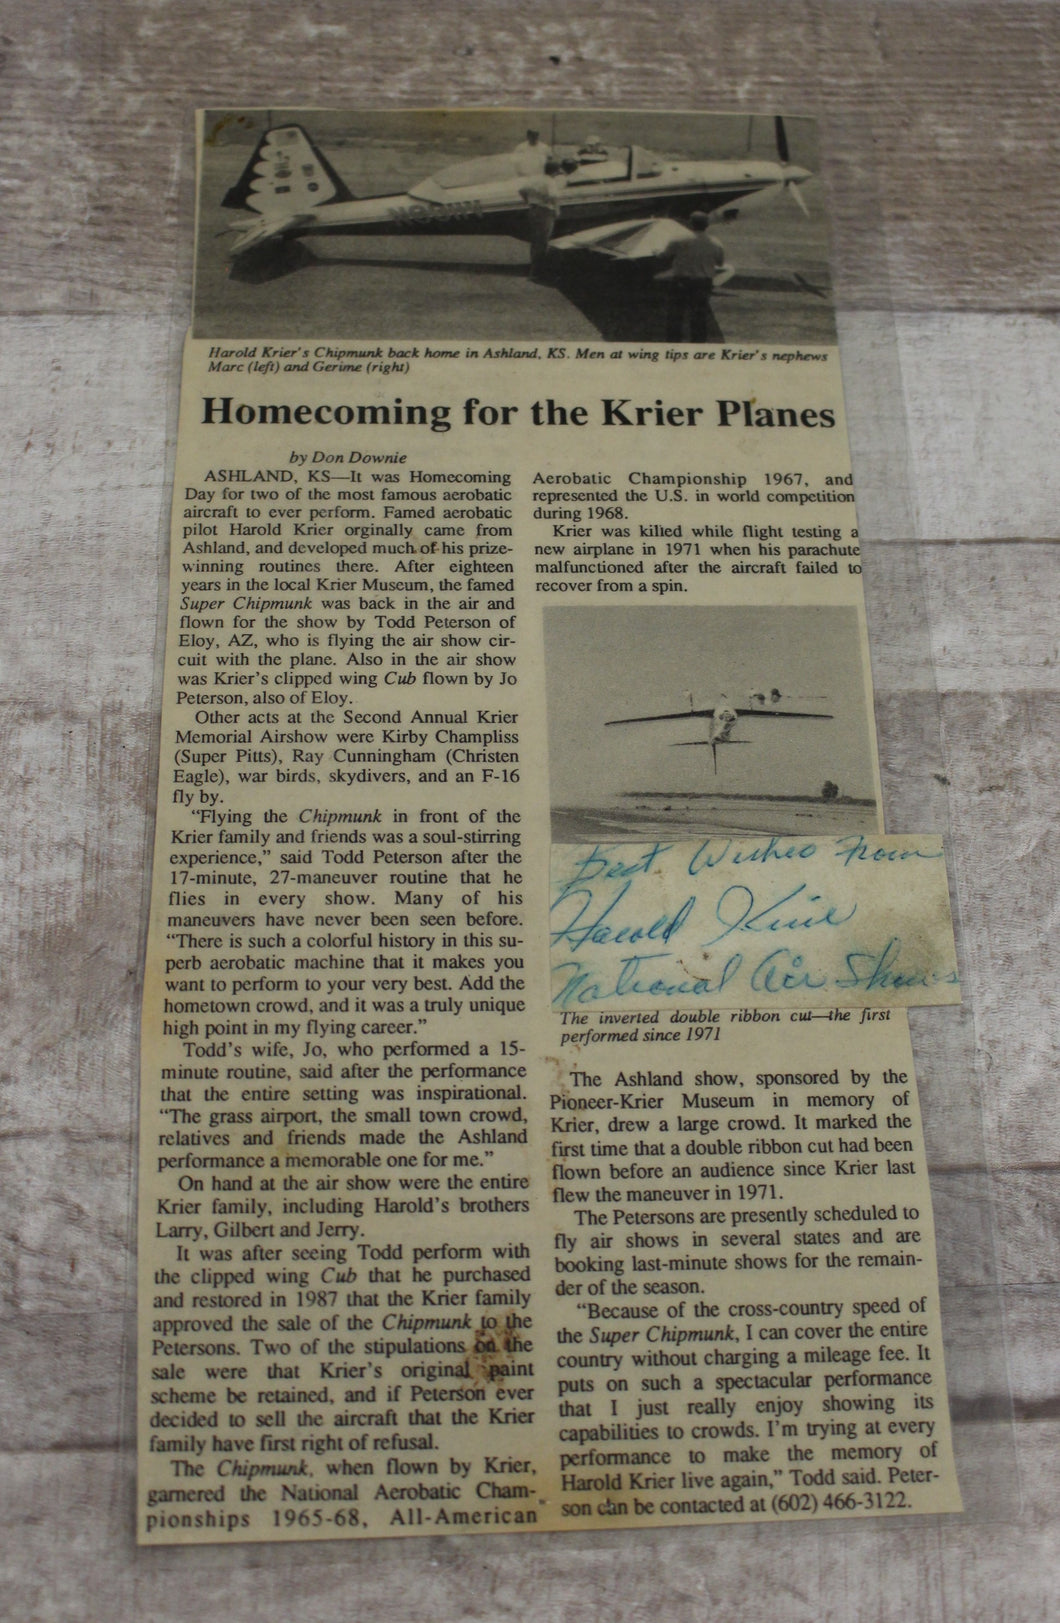 Homecoming for the Krier Planes Newpaper Article - By Don Downie - Laminated